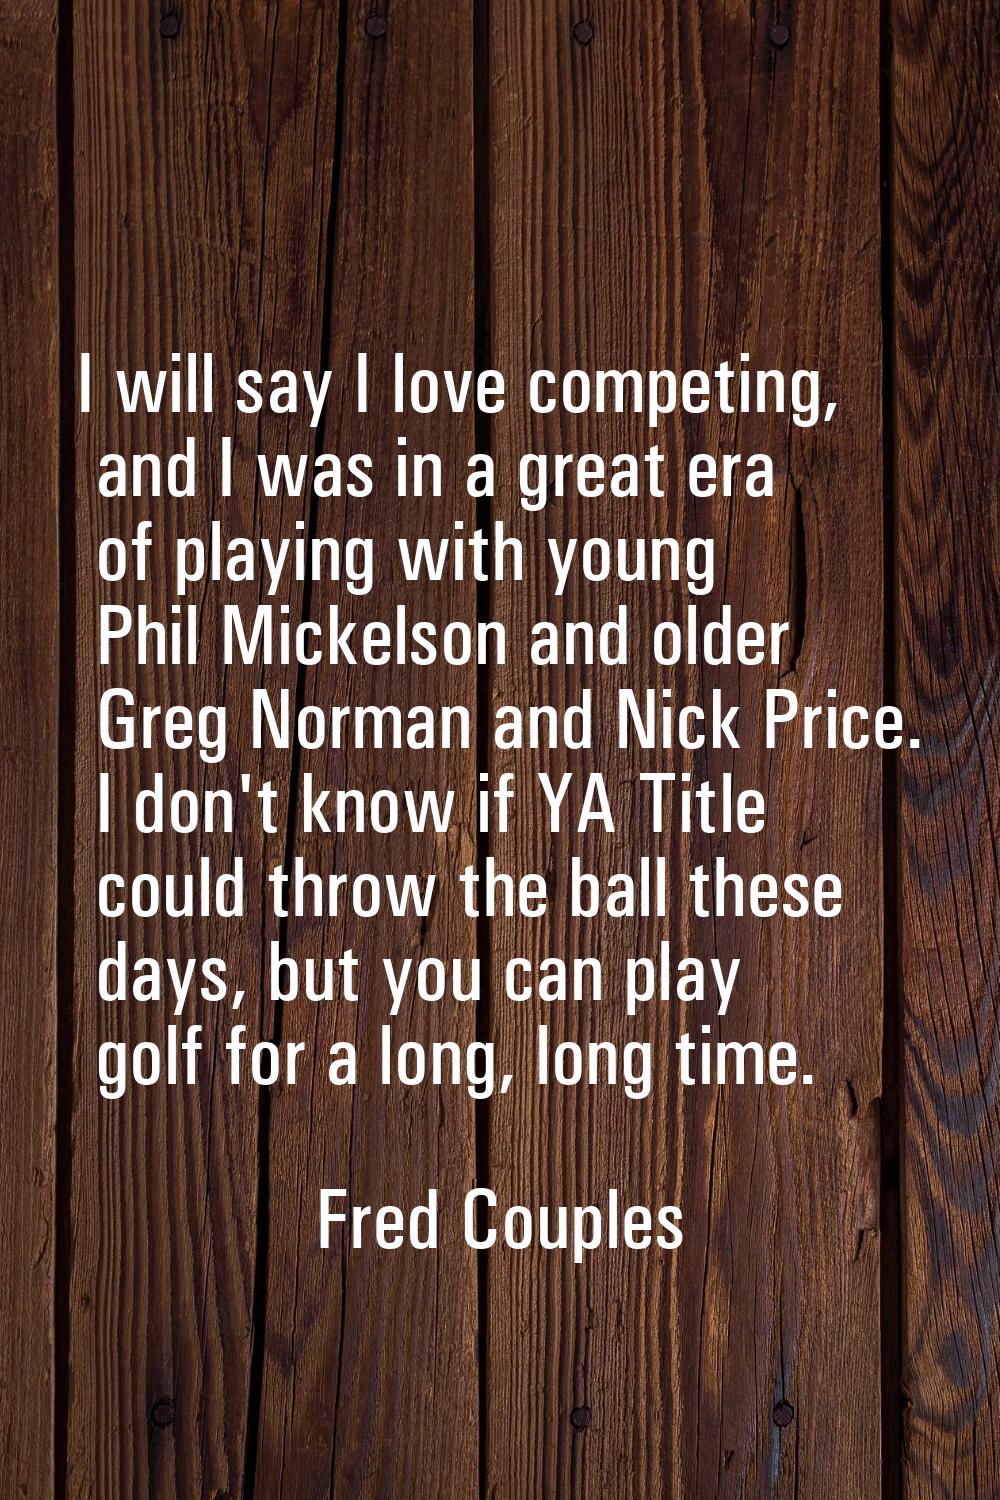 I will say I love competing, and I was in a great era of playing with young Phil Mickelson and olde